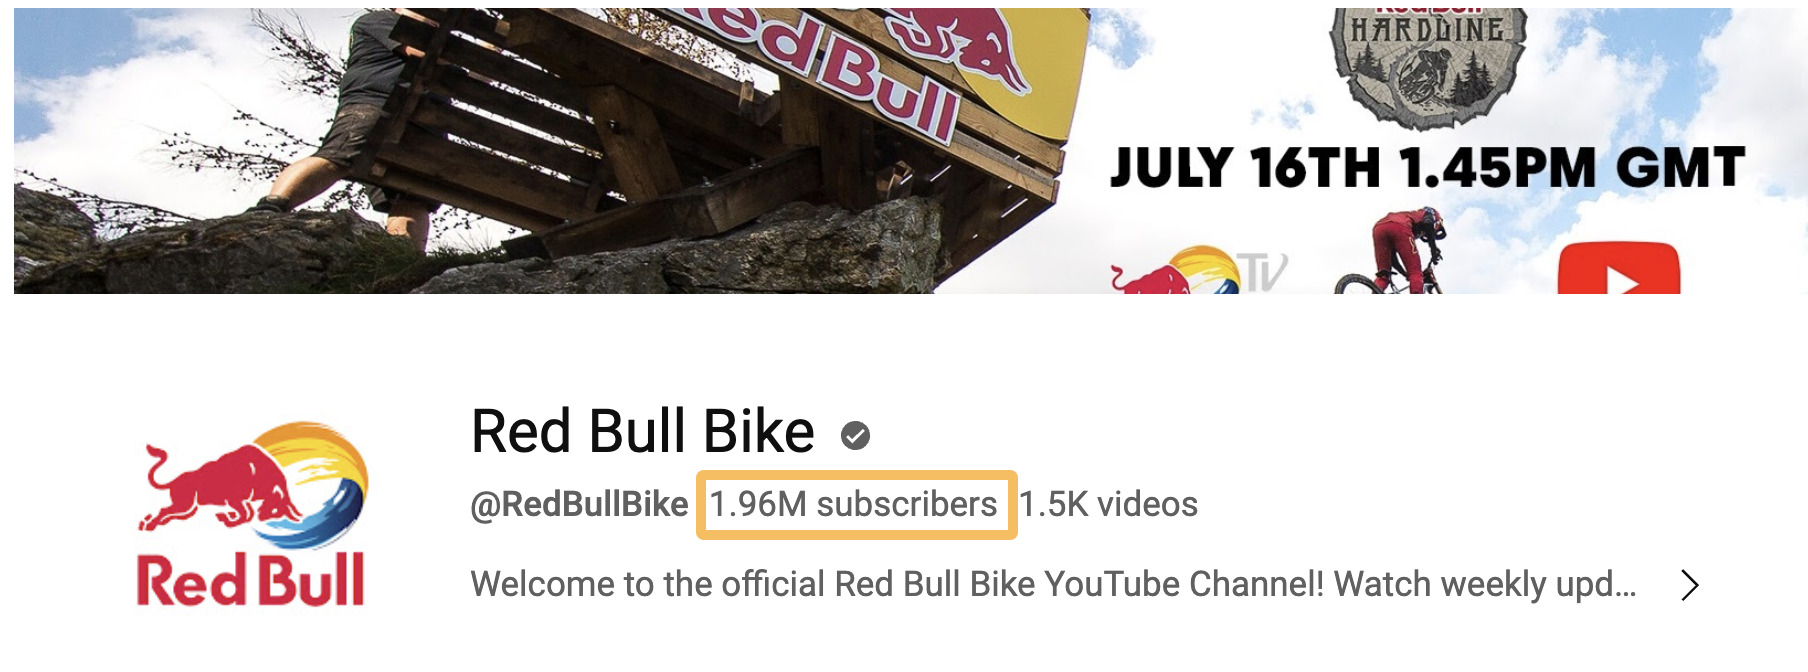 Subscriber count of almost 2M on Red Bull Bike's YouTube page